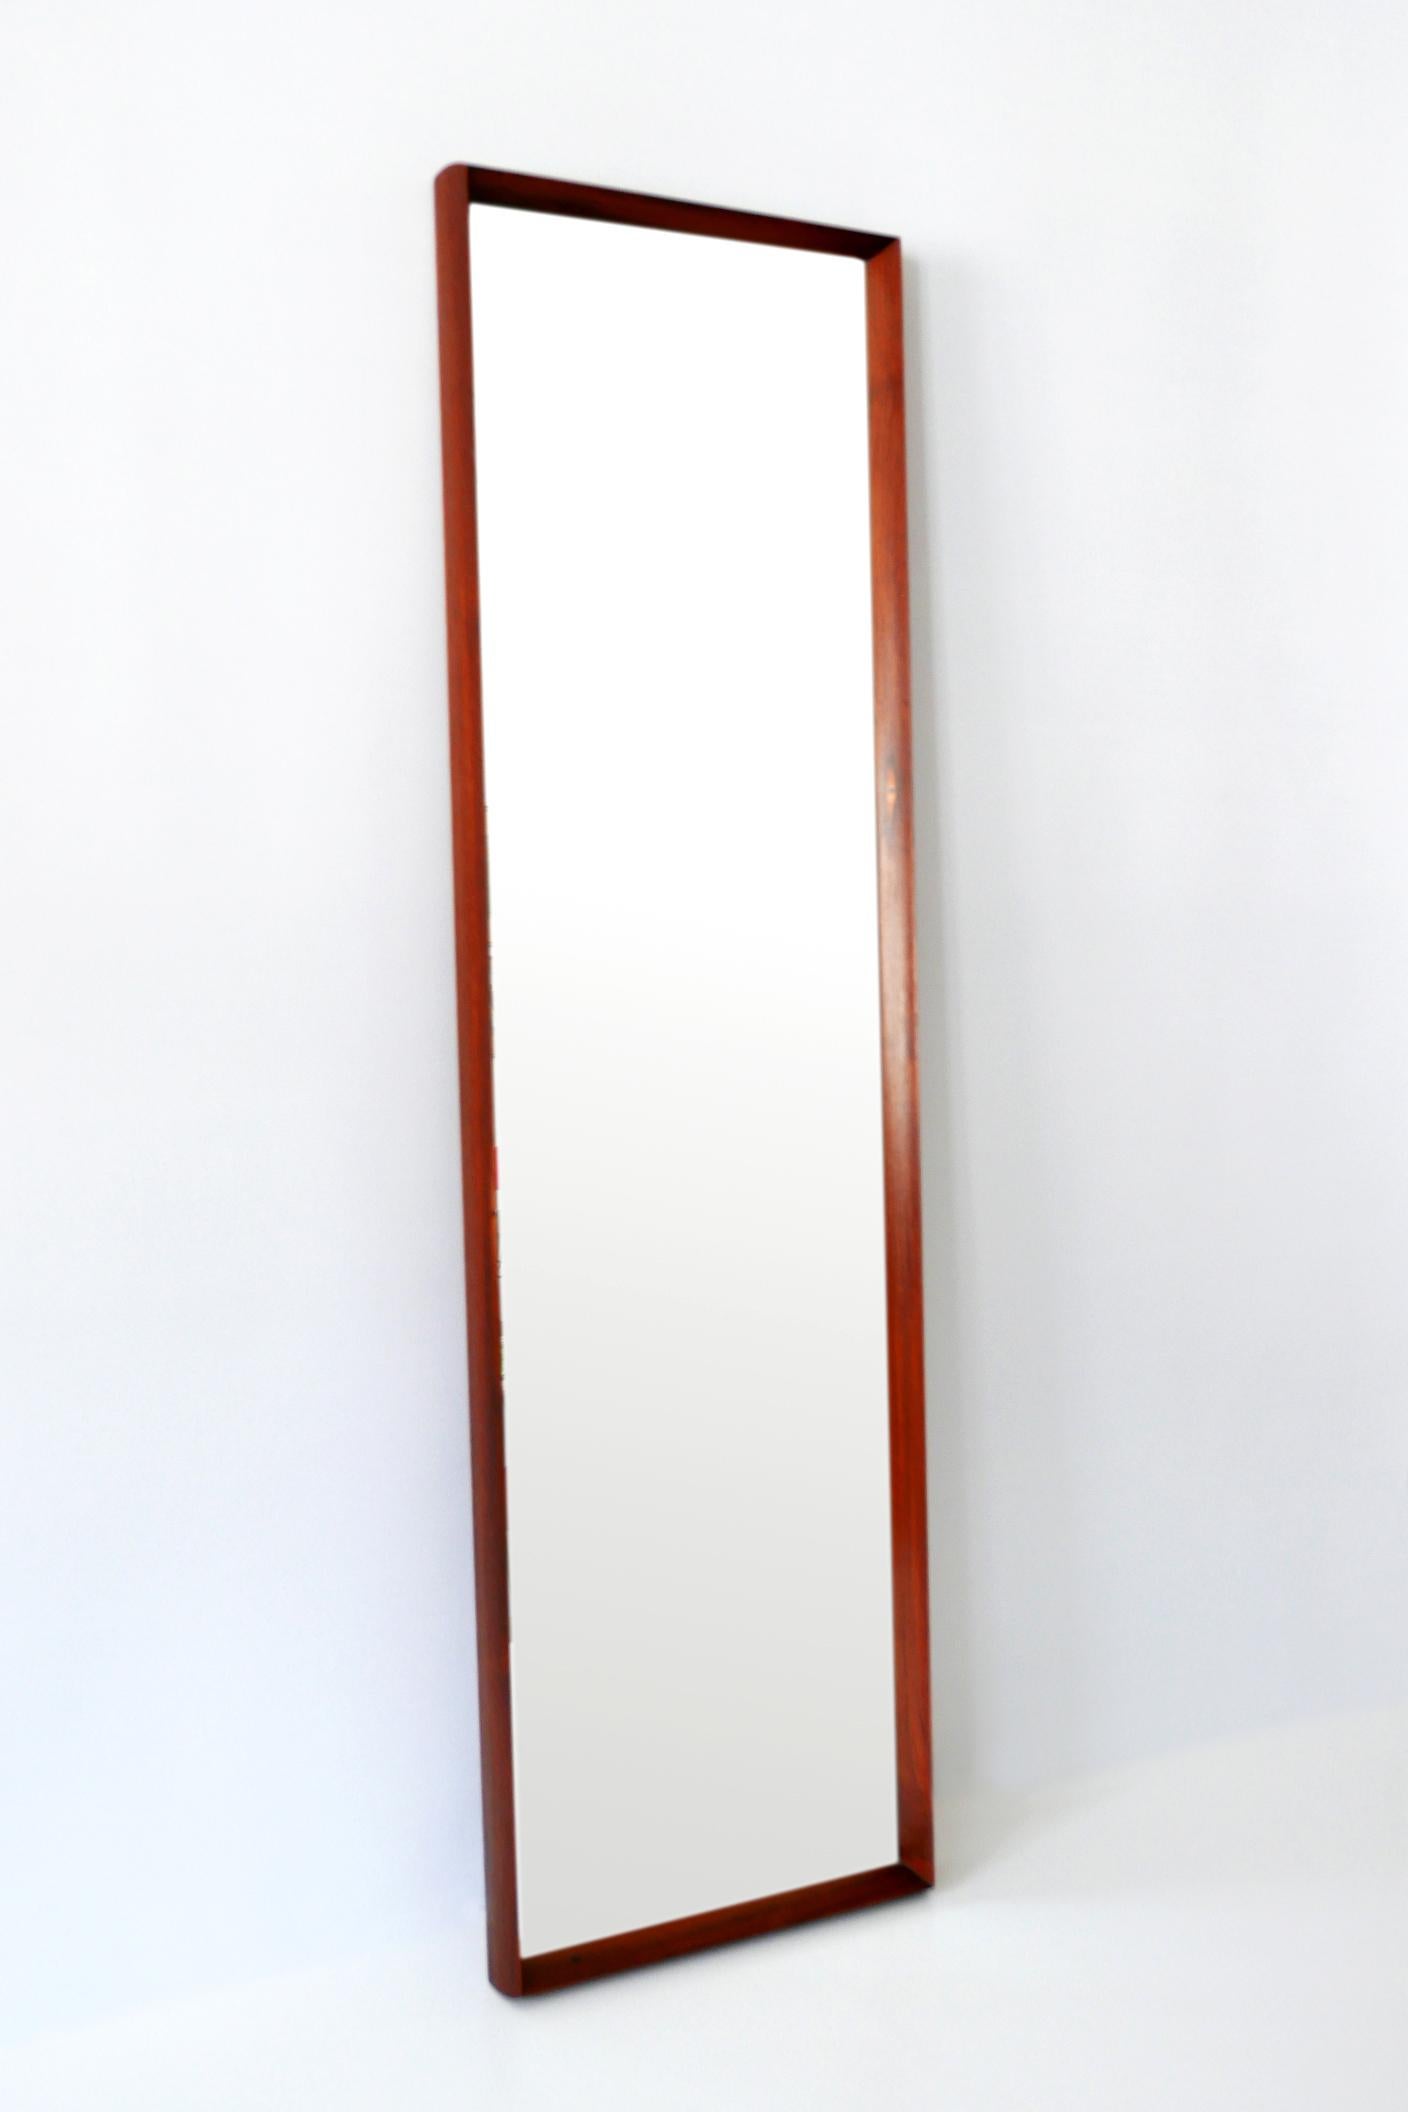 Rare and elegant Mid-Century Modern entry wall mirror in a fine teak frame. Manufactured by AB Glas & Trä, Sweden, 1962. Manufacturers paper label reverse.

Executed in teak wood and mirror glass.

Condition:
Good original vintage condition. Wear